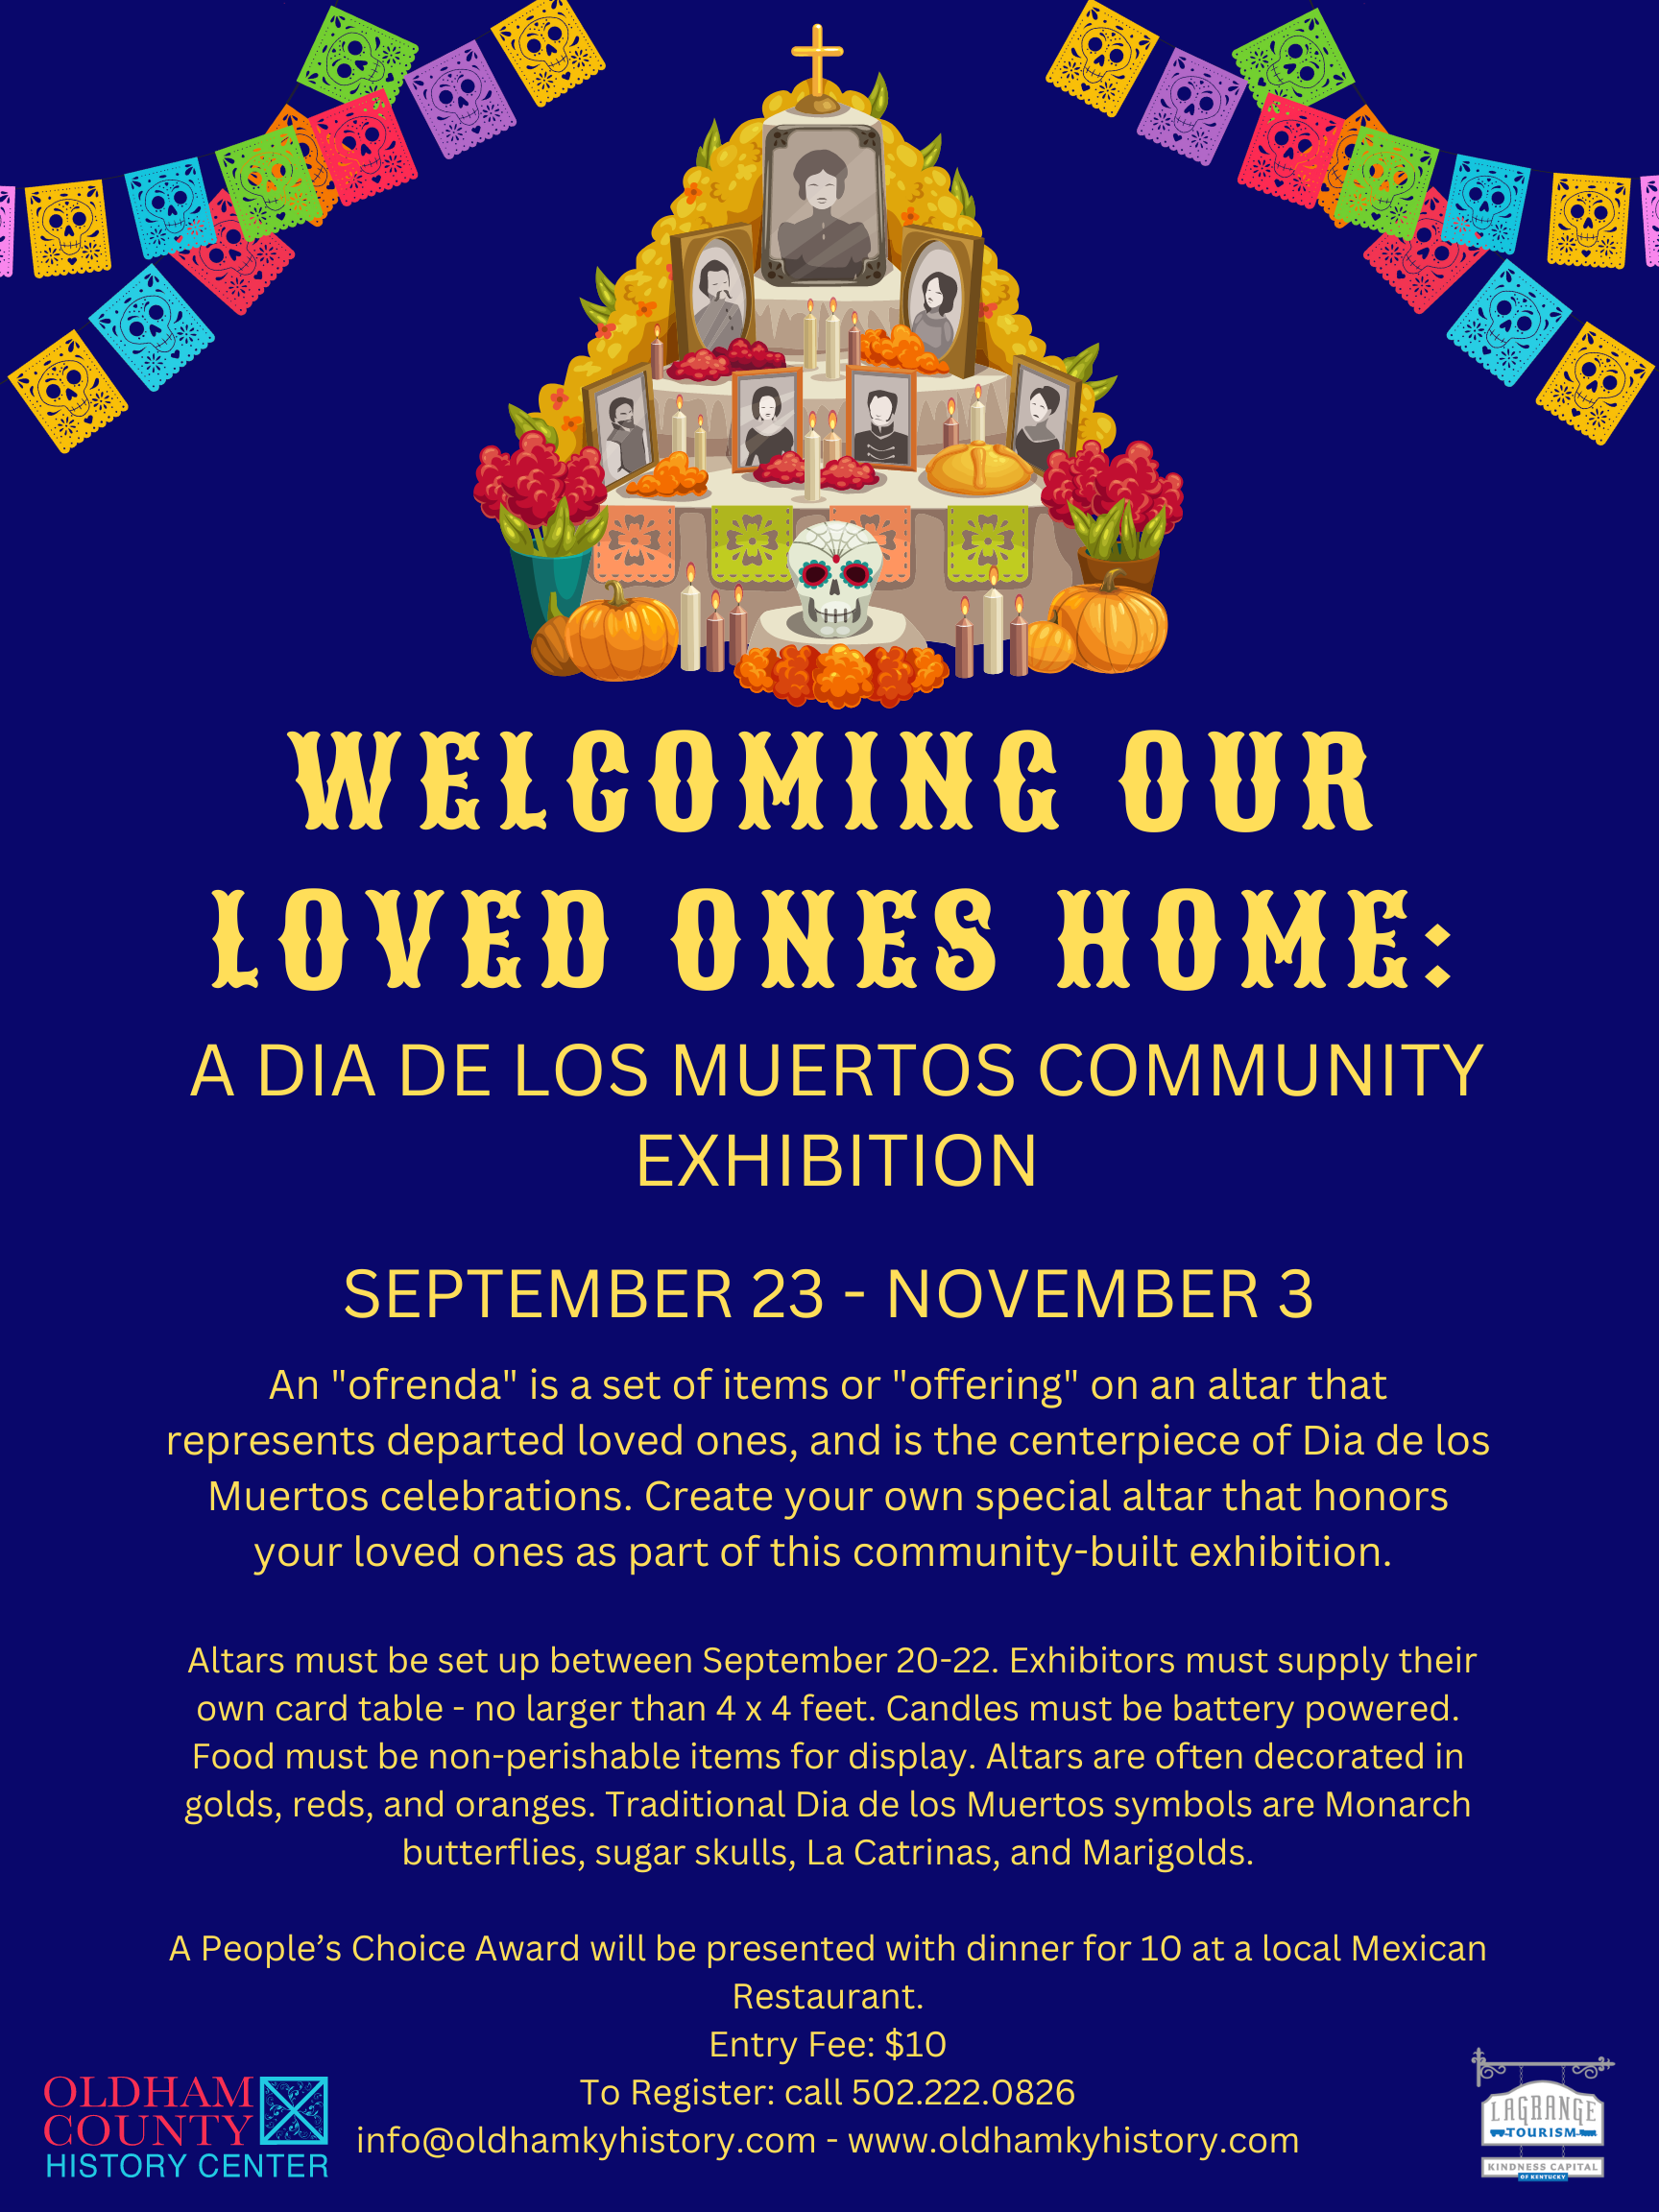 What Is Day of the Dead? Día de los Muertos Celebrations and History